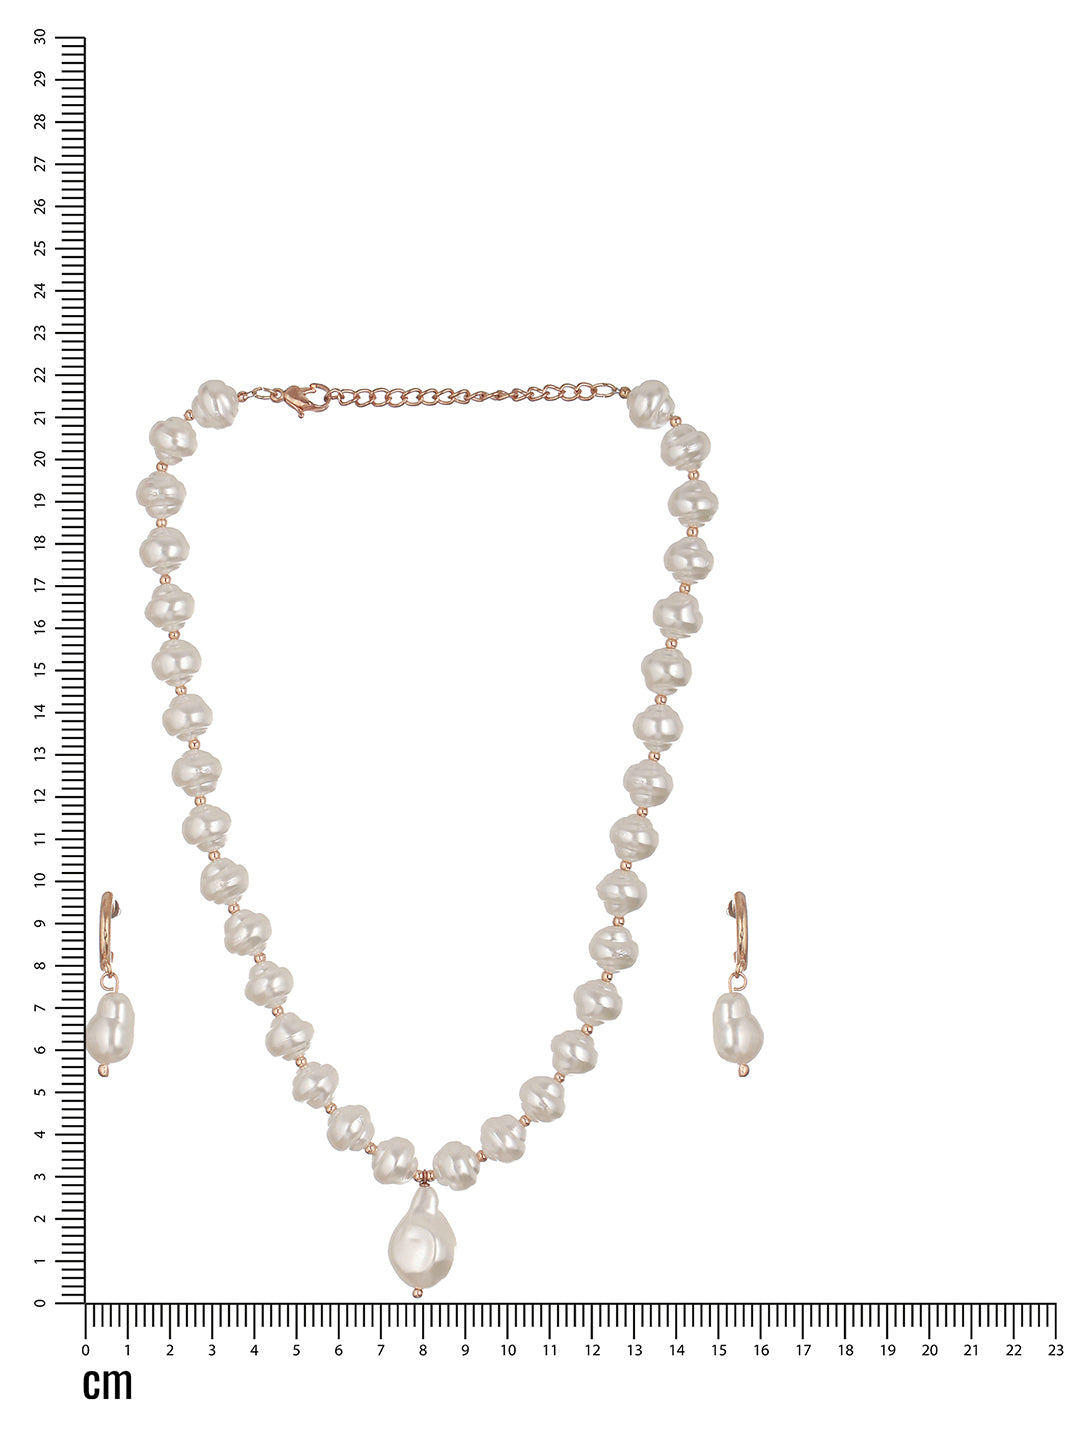 White & Gold-Toned Pearls Choker Necklace with Earrings